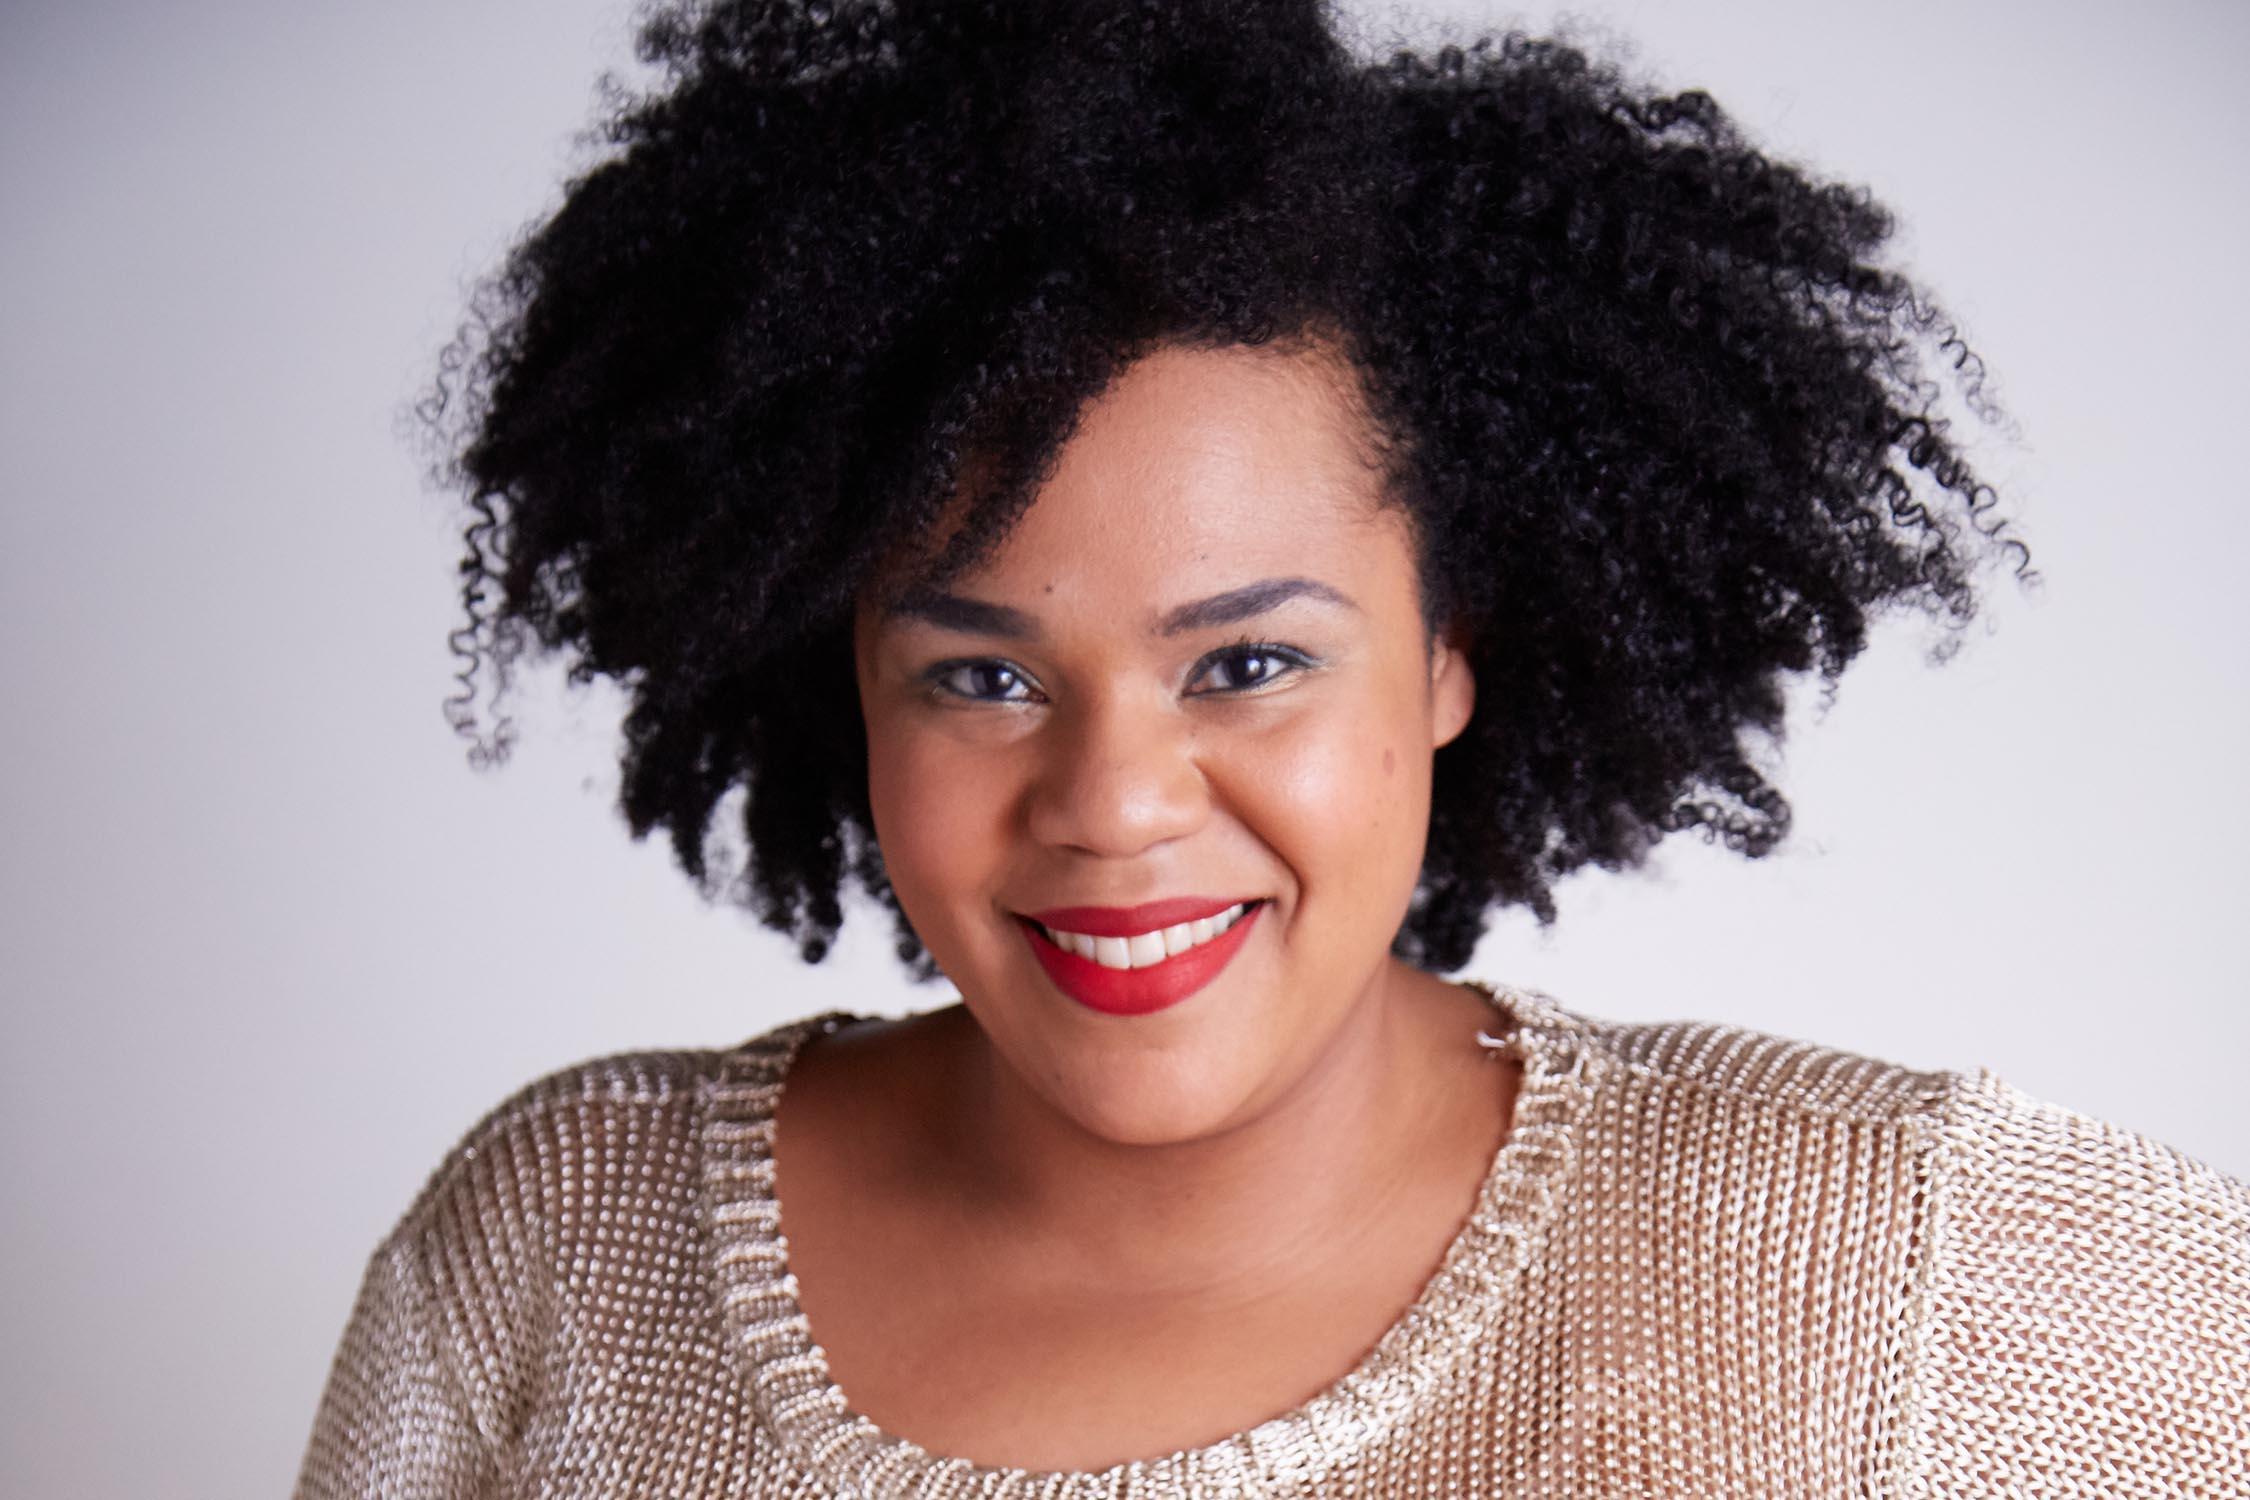 Desiree Burch, Soho Theatre On Demand review - fantastical storytelling